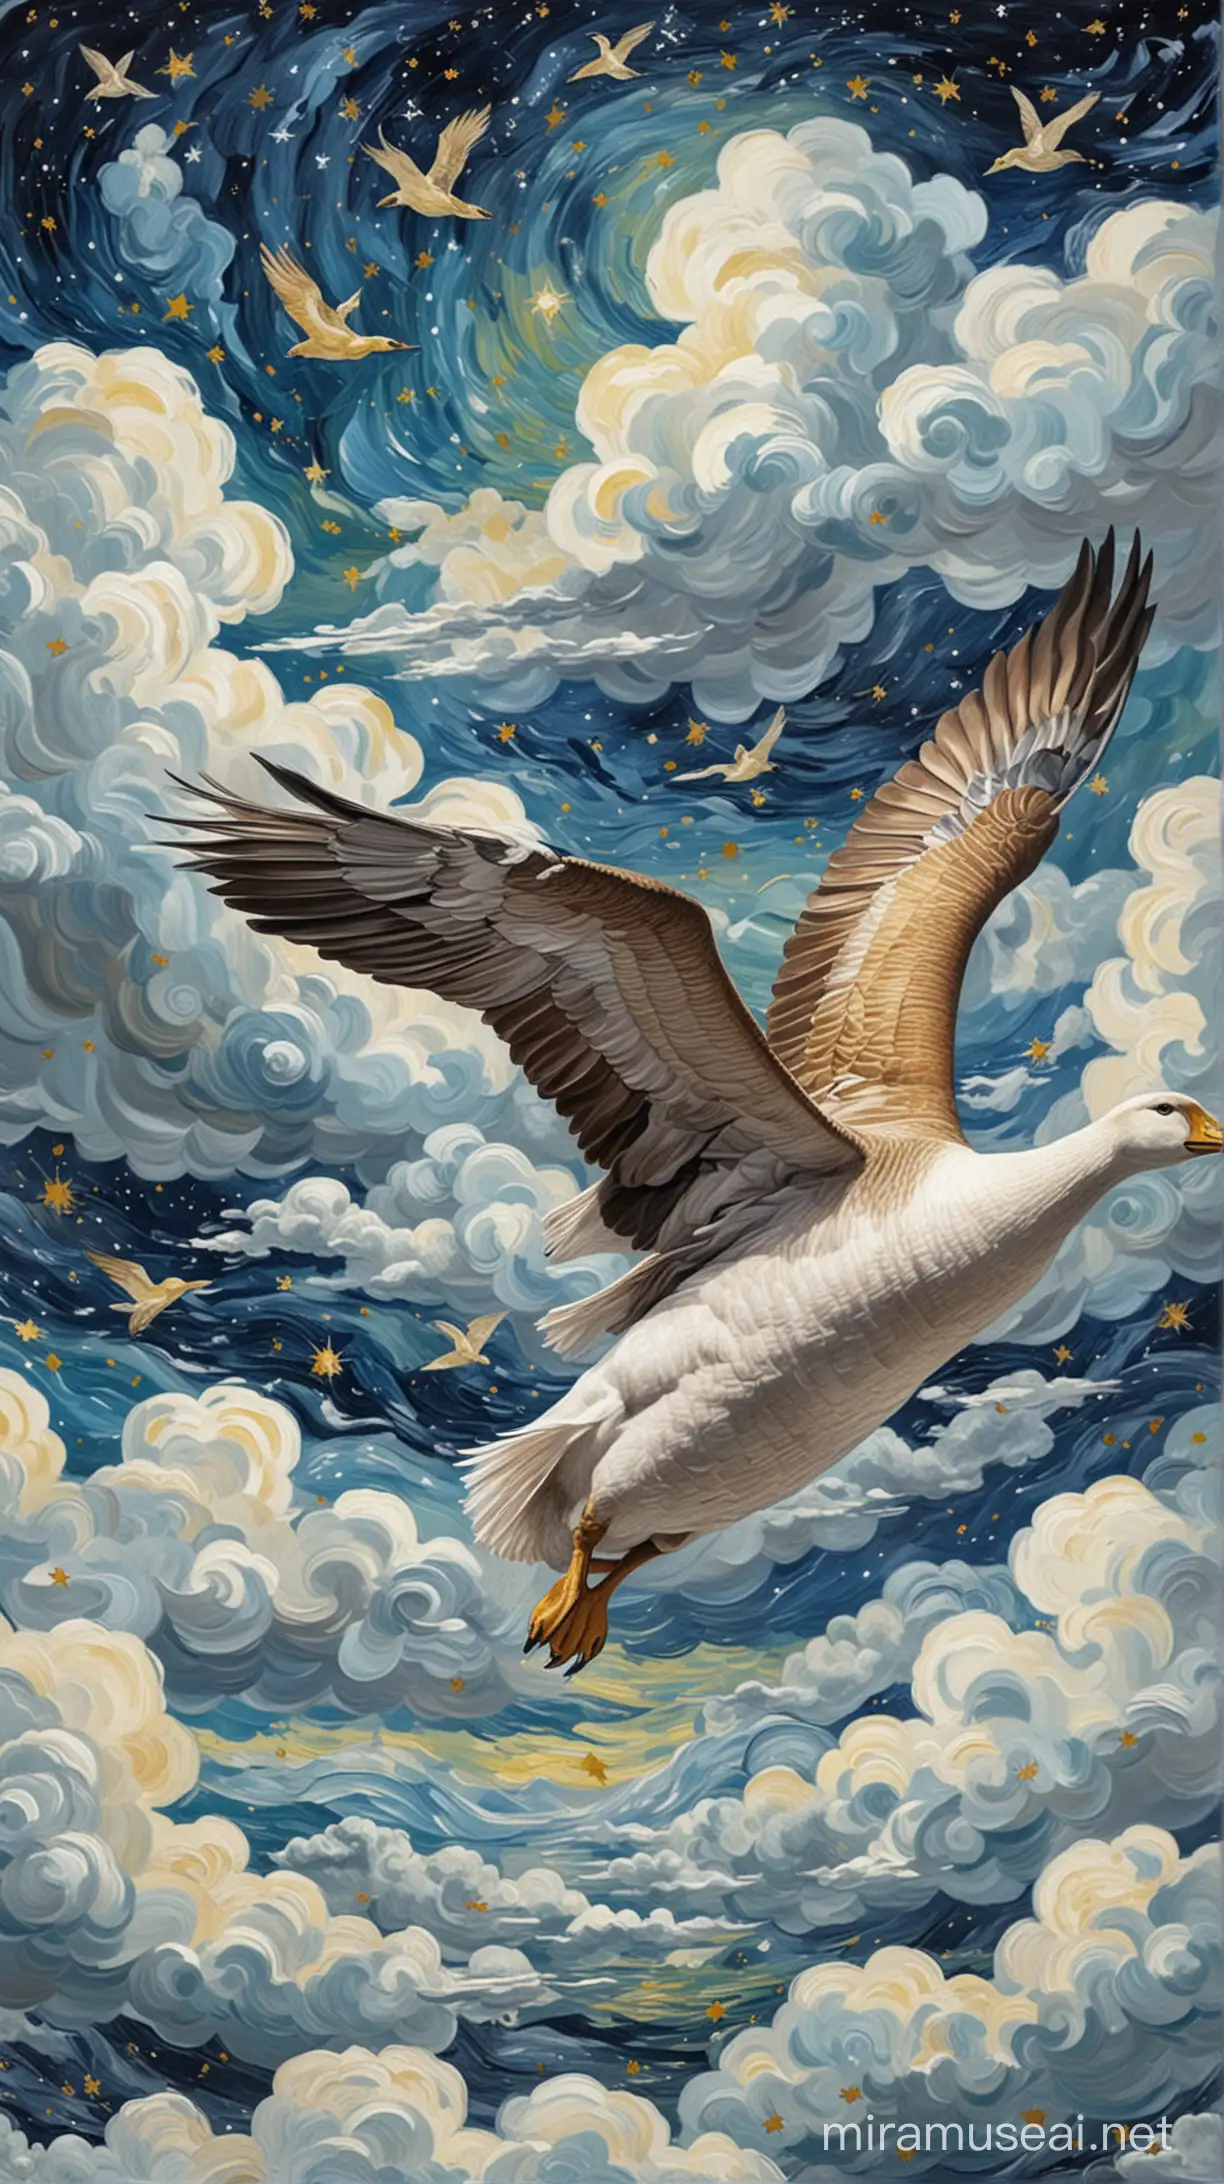 Starry Night Inspired Goose Flight on White Clouds